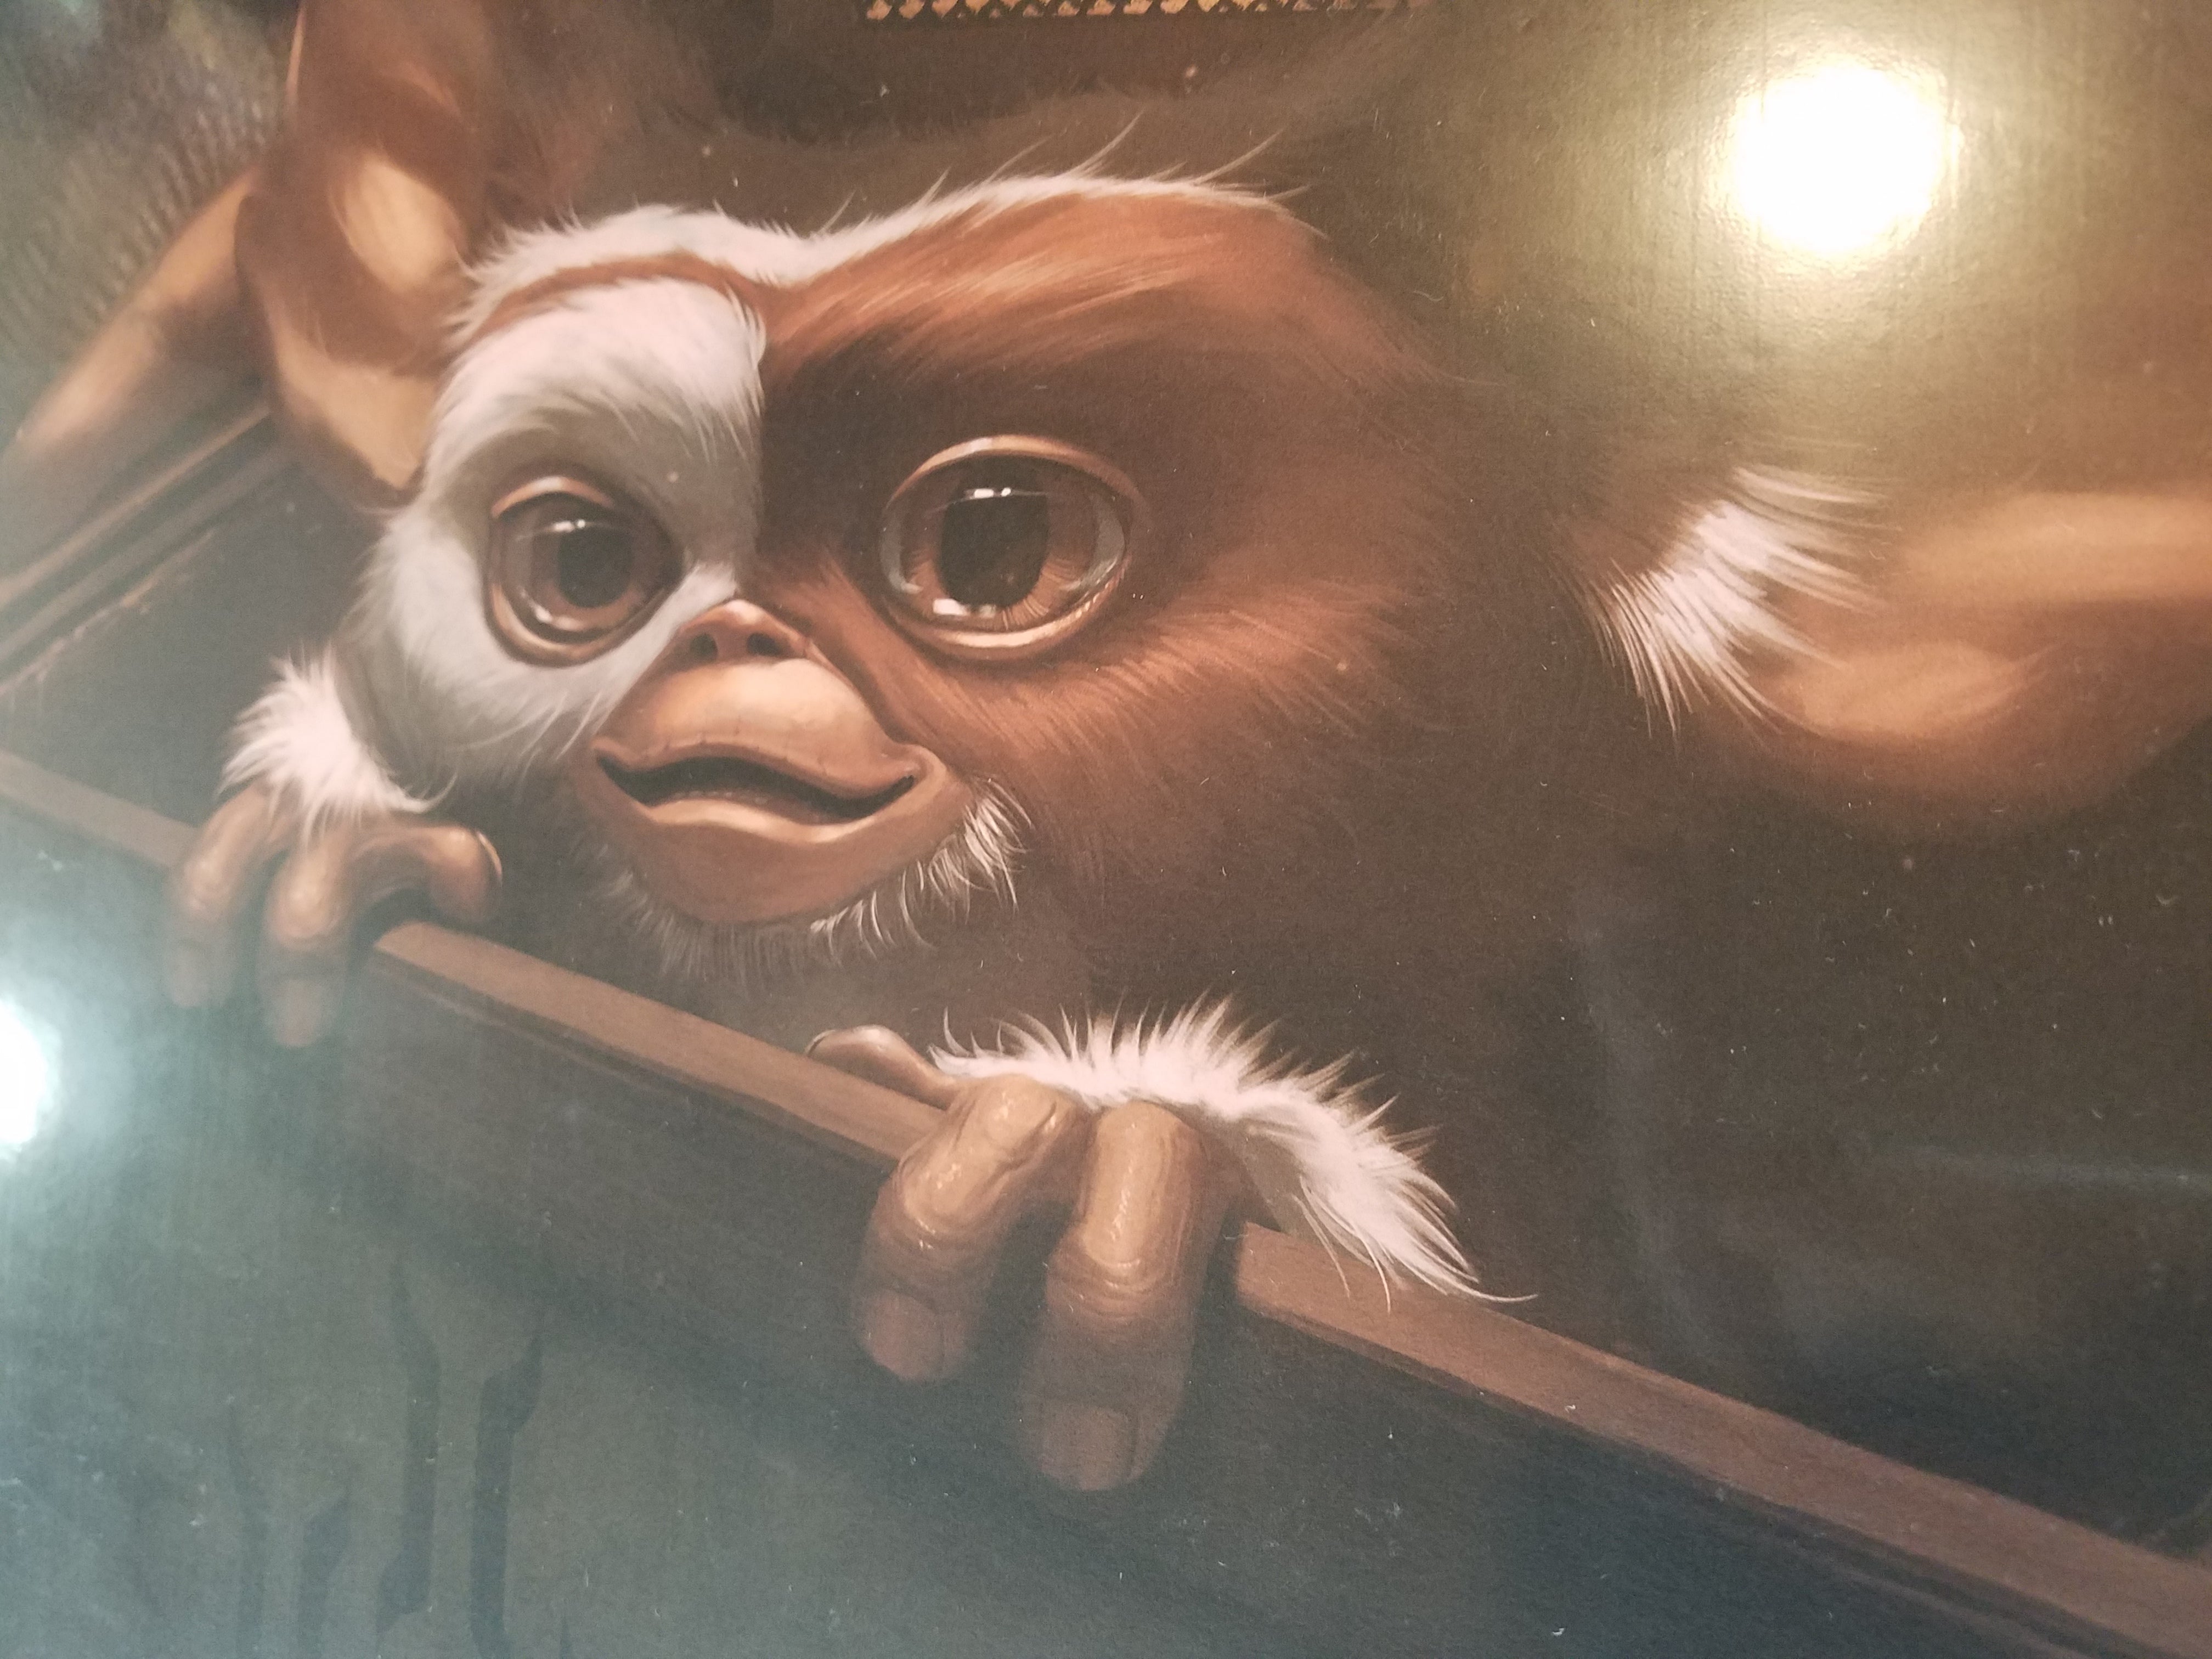 Title:  Gizmo  Artist:  Ann Bembi  Edition:  Hand-numbered edition of 100  Type:  Screen print poster  Size:  18" x 24"  Notes: Inspired by the movie "Gremlins." stored flat in very good condition.  Check out our other listings for more hard-to-find and out-of-print posters.